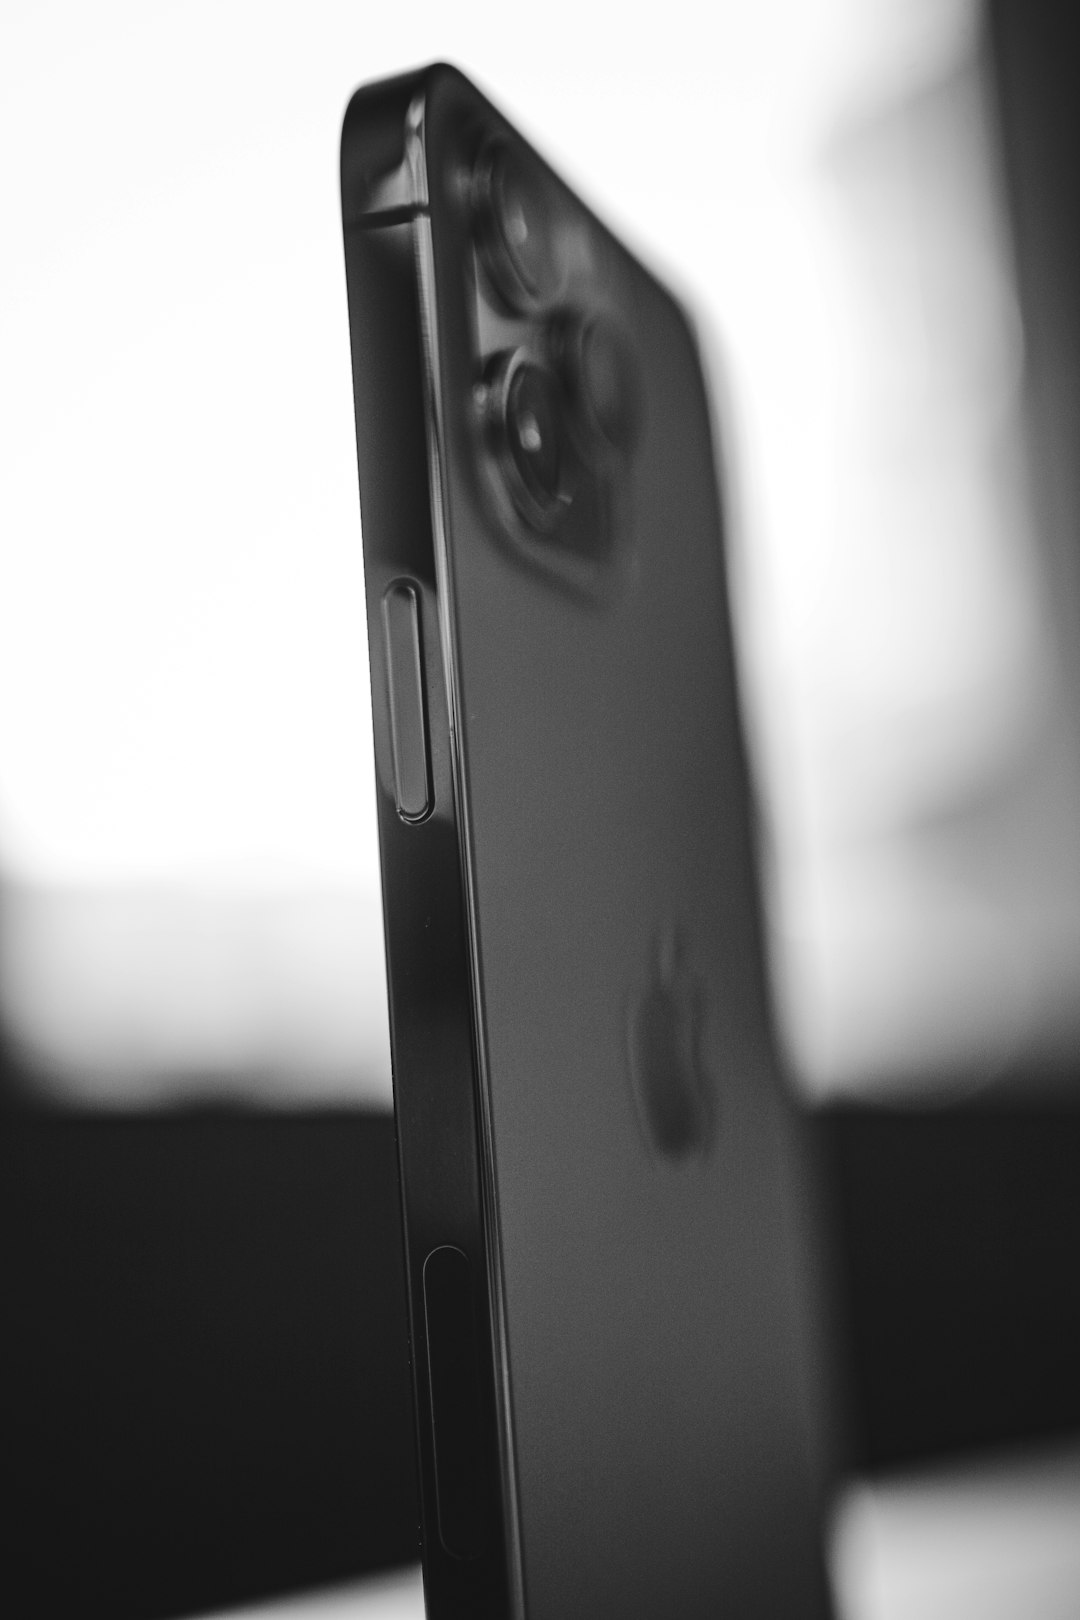 black and white photo of a smartphone